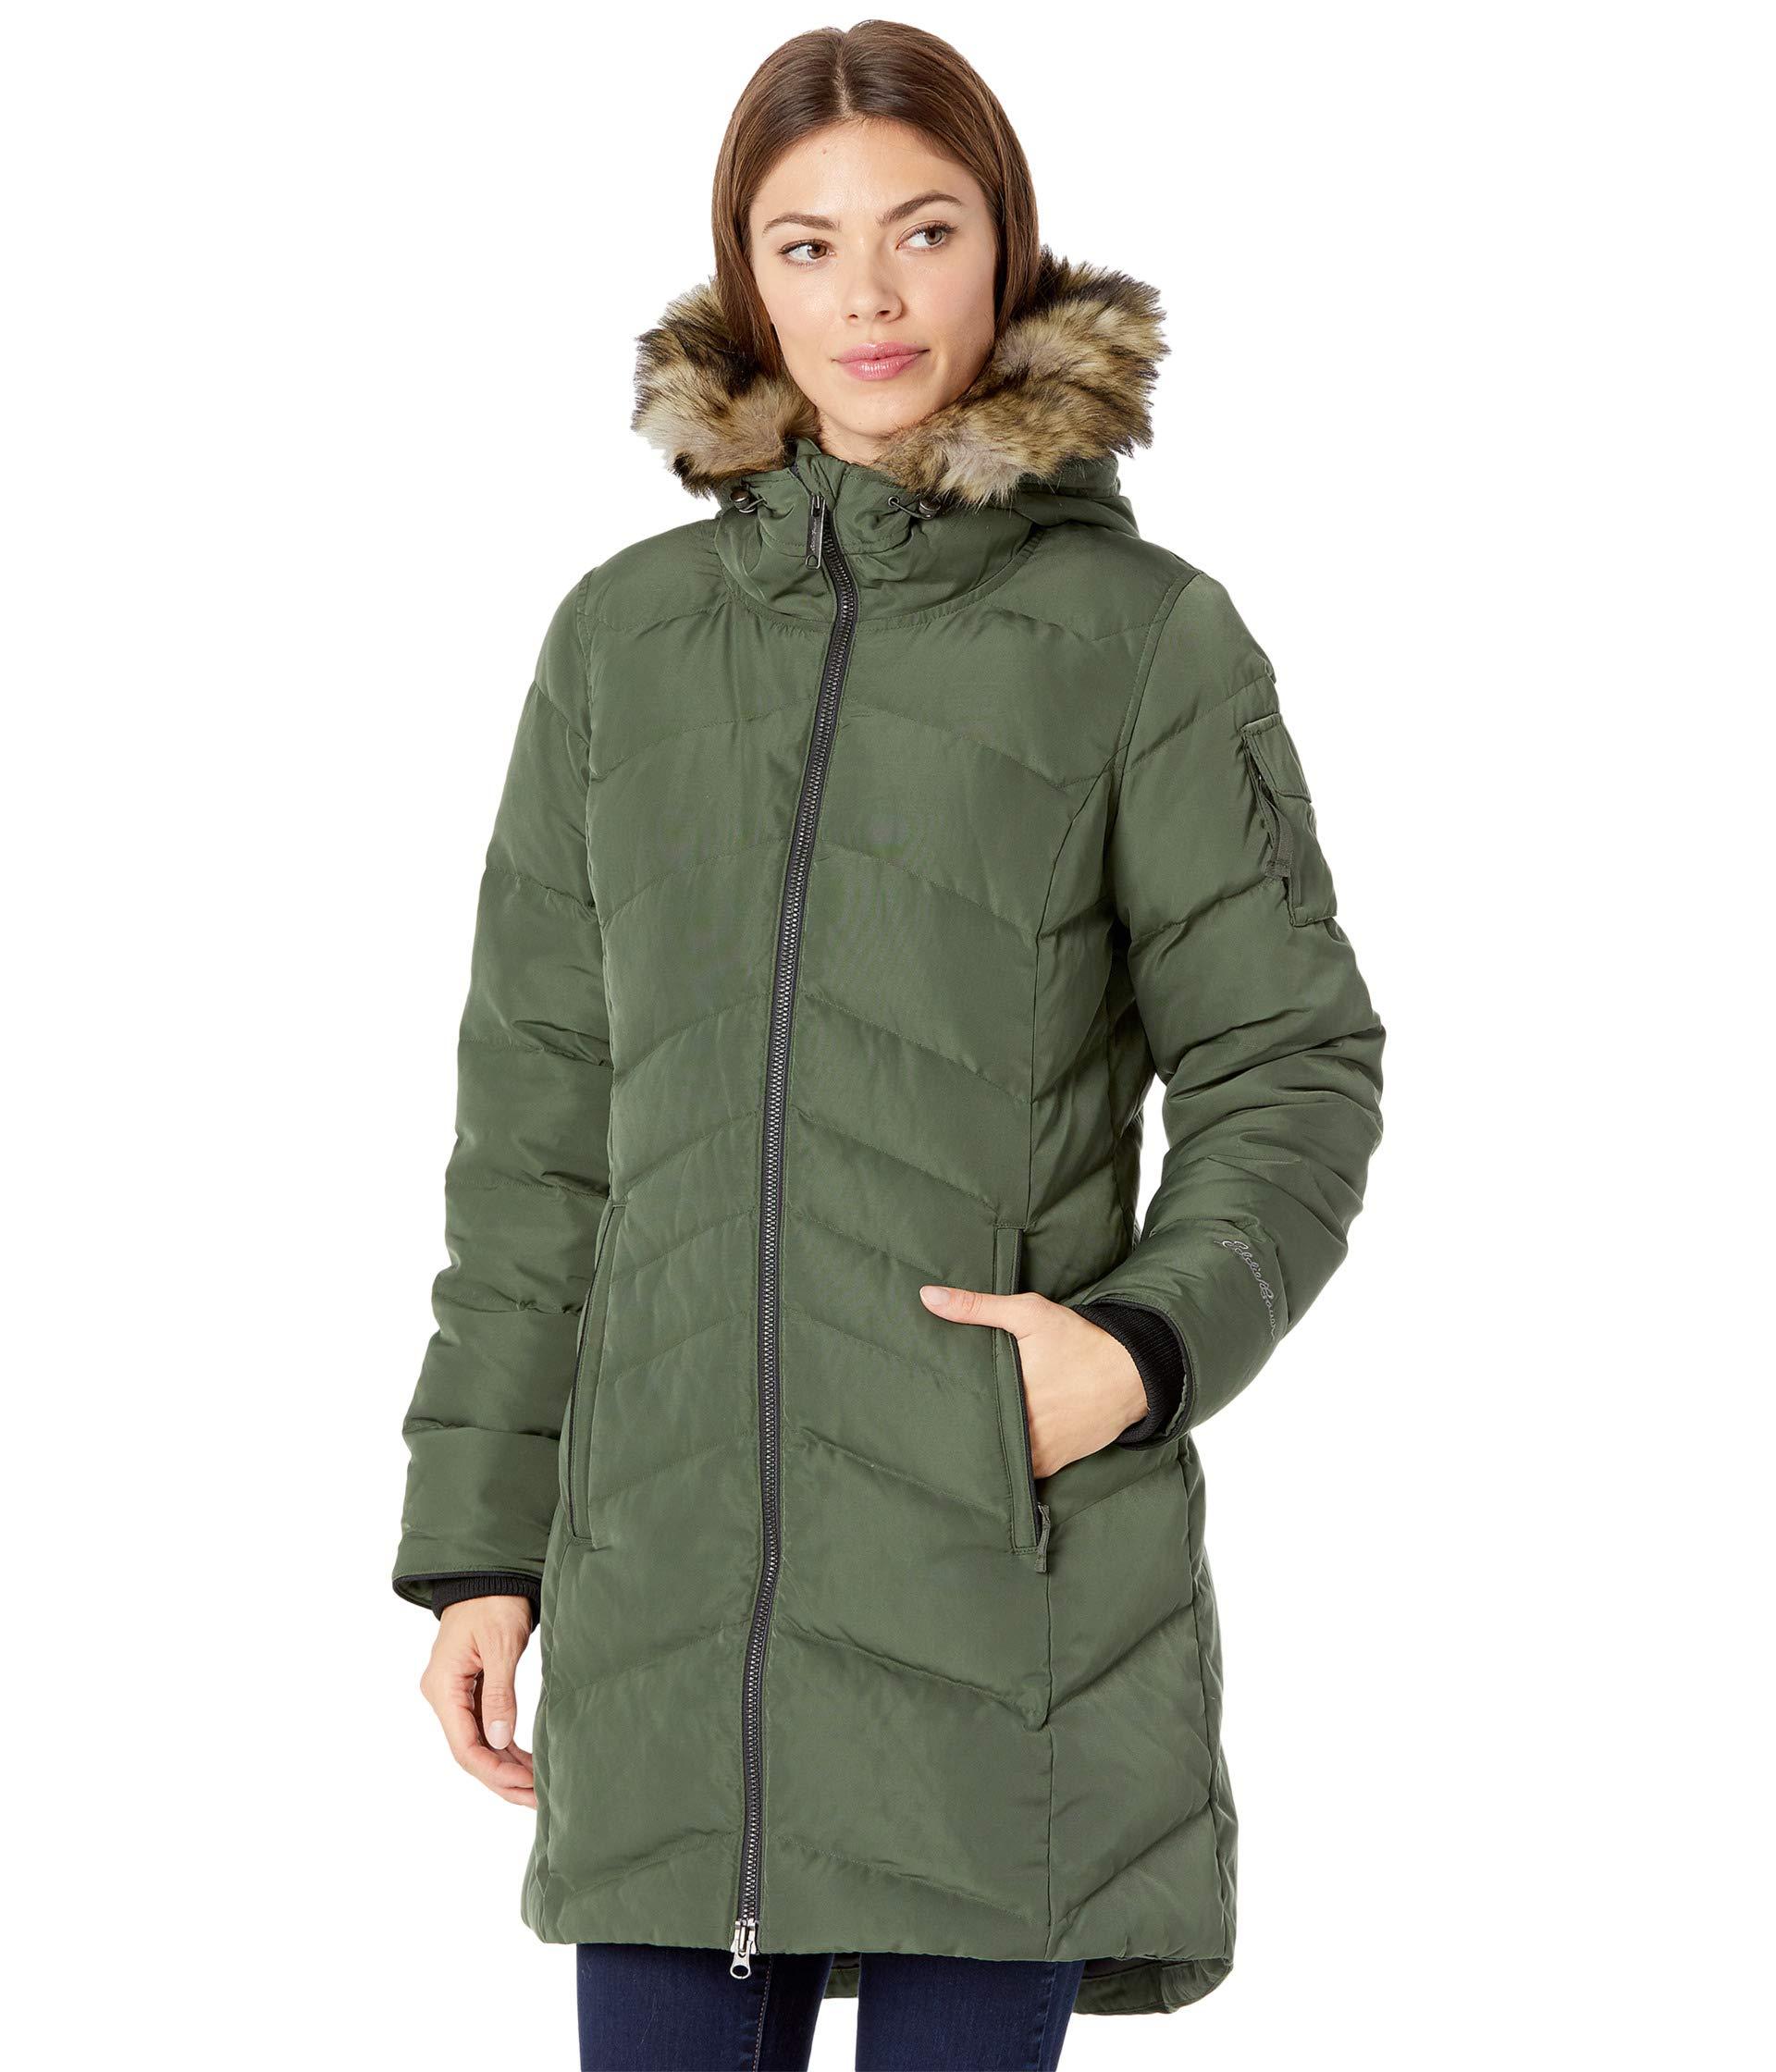 Eddie Bauer Synthetic Sun Valley Arctic Down Parka in Olive (Green) - Lyst